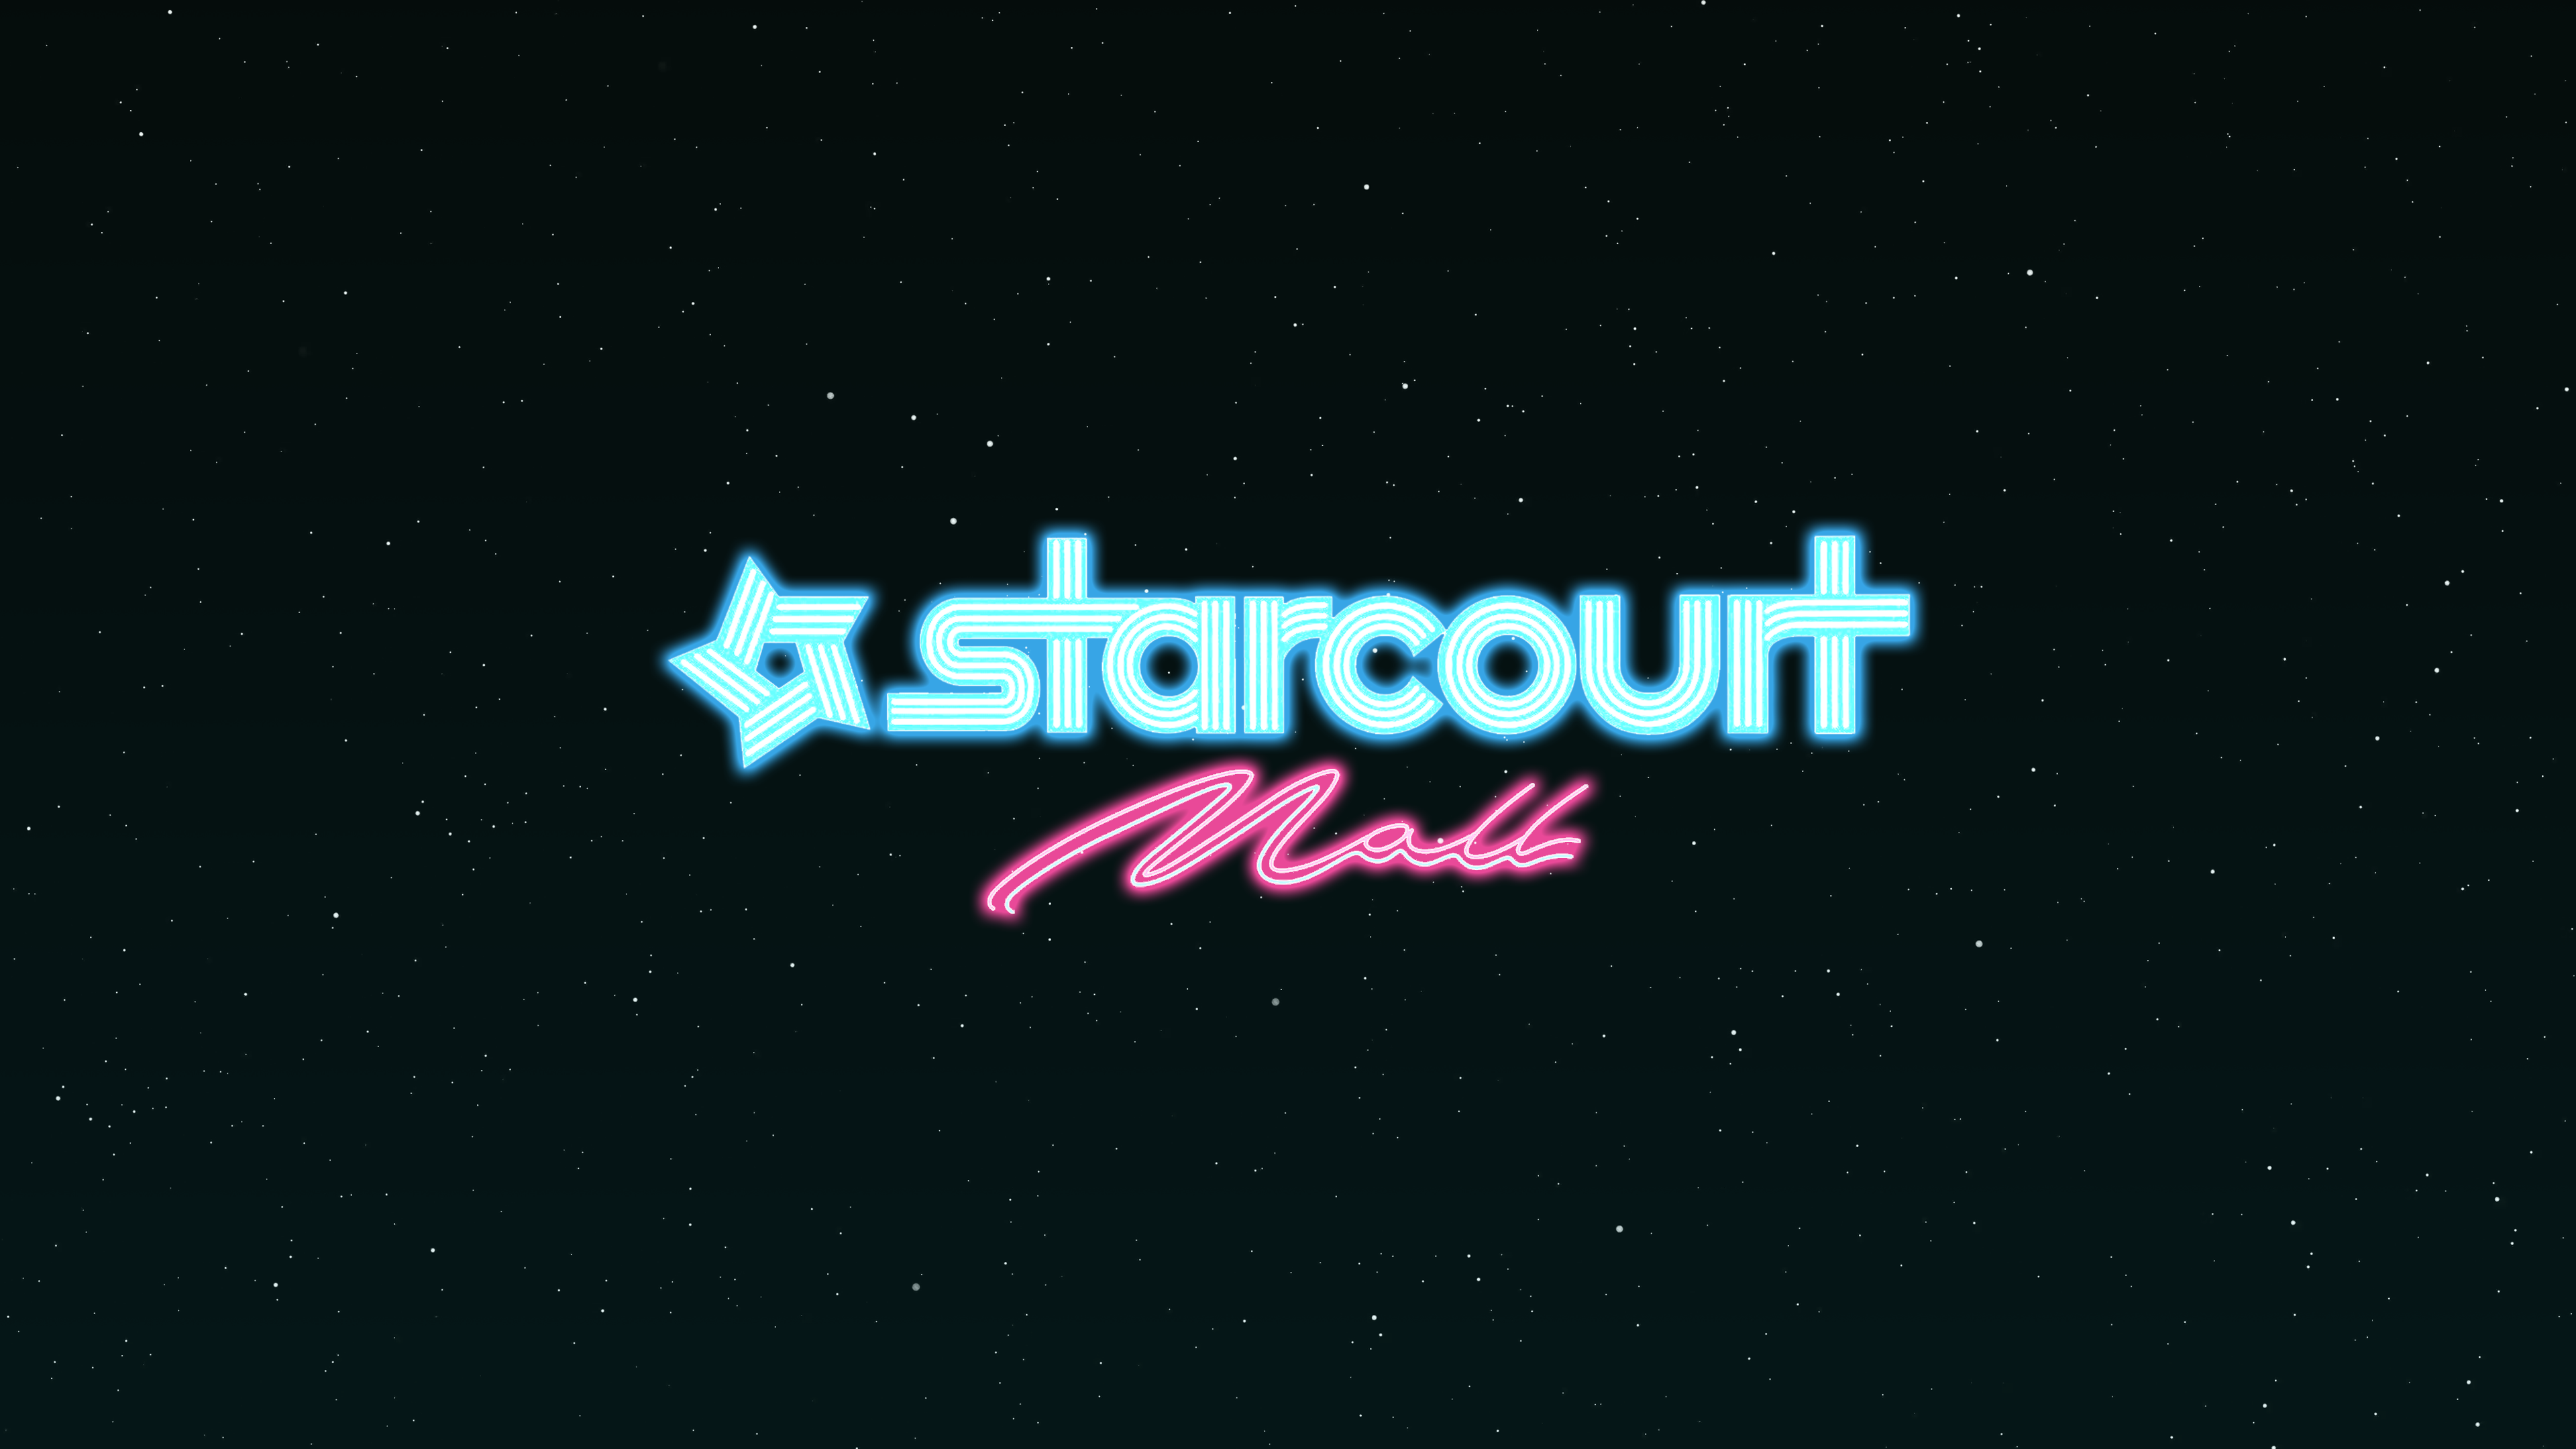 Starcourt Mall logo I made in Photohop because wallpaper